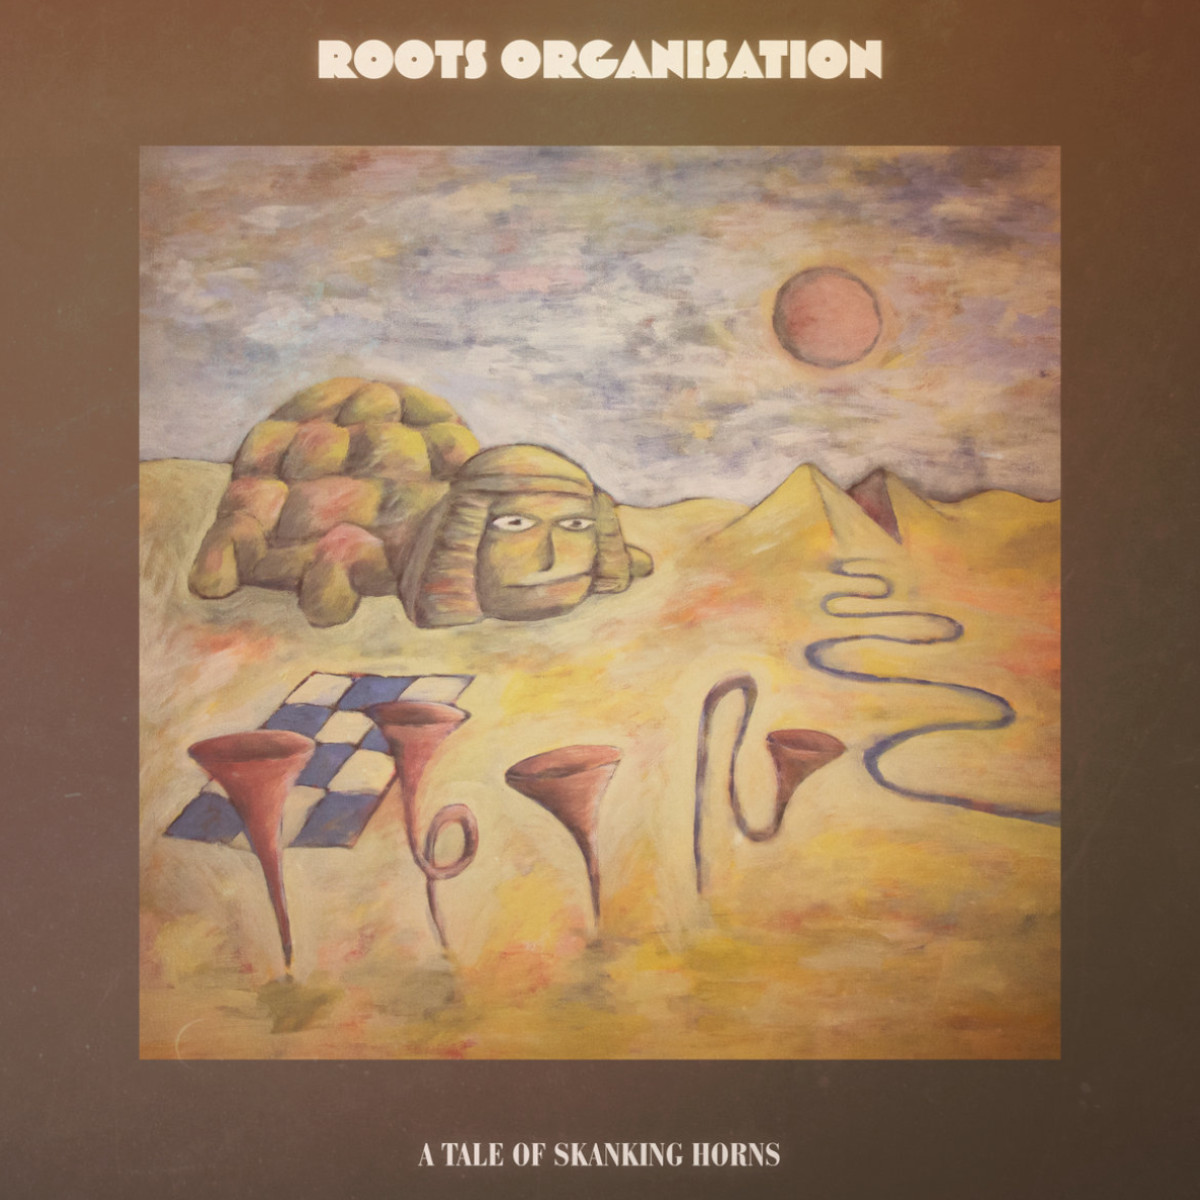 A Tale Of Skanking Horns - Roots Organisation Gingko Tree Music - Release: 10/14/2022